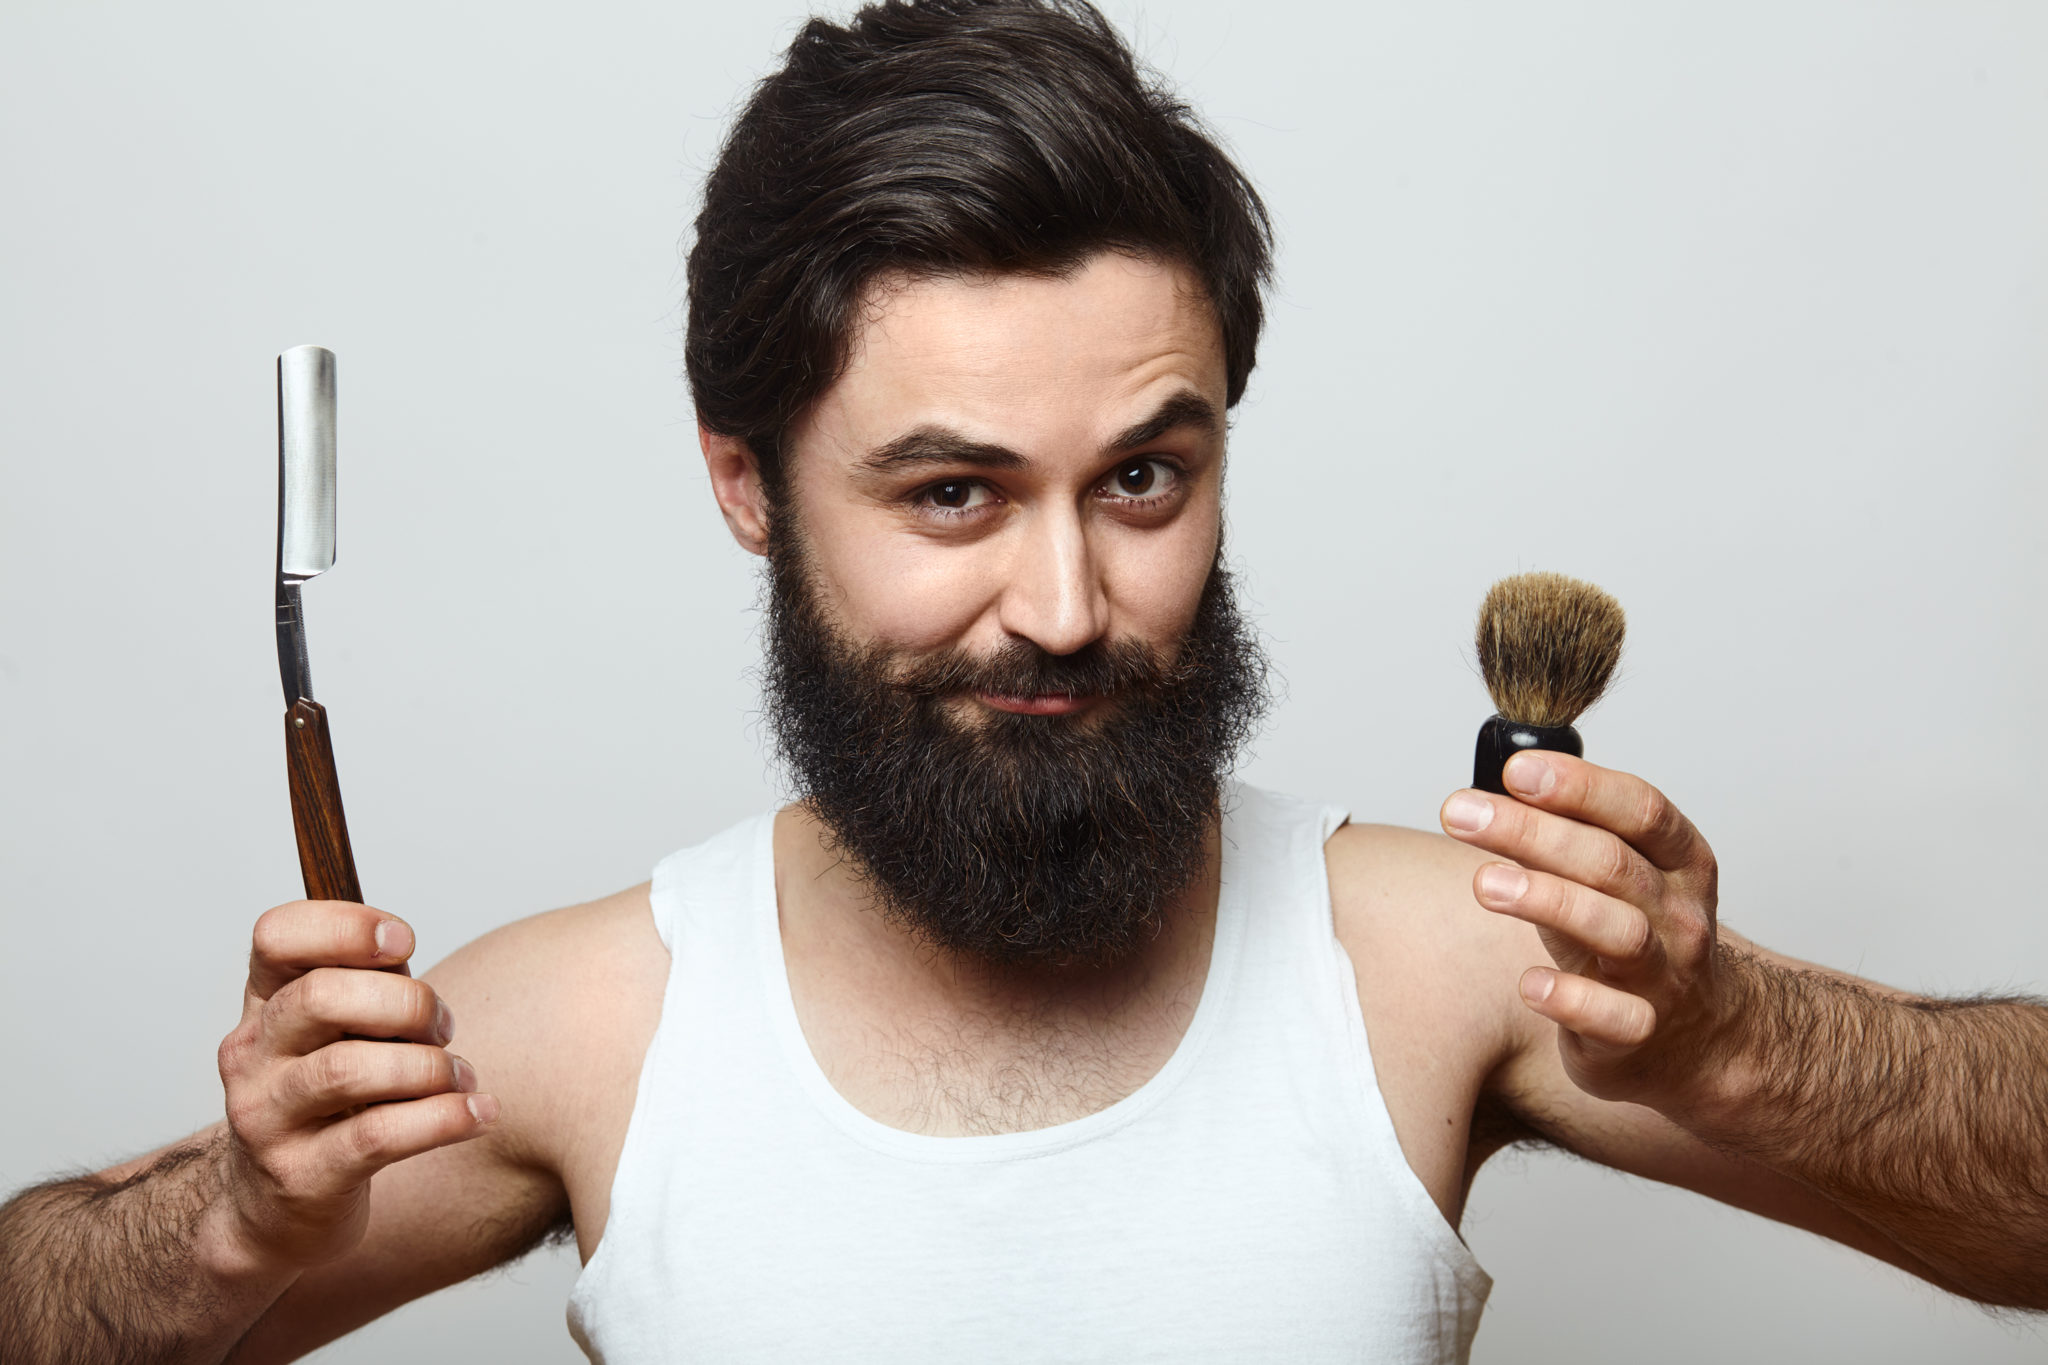 Before you condemn dry shaving, let us tell you all about the pros and cons.